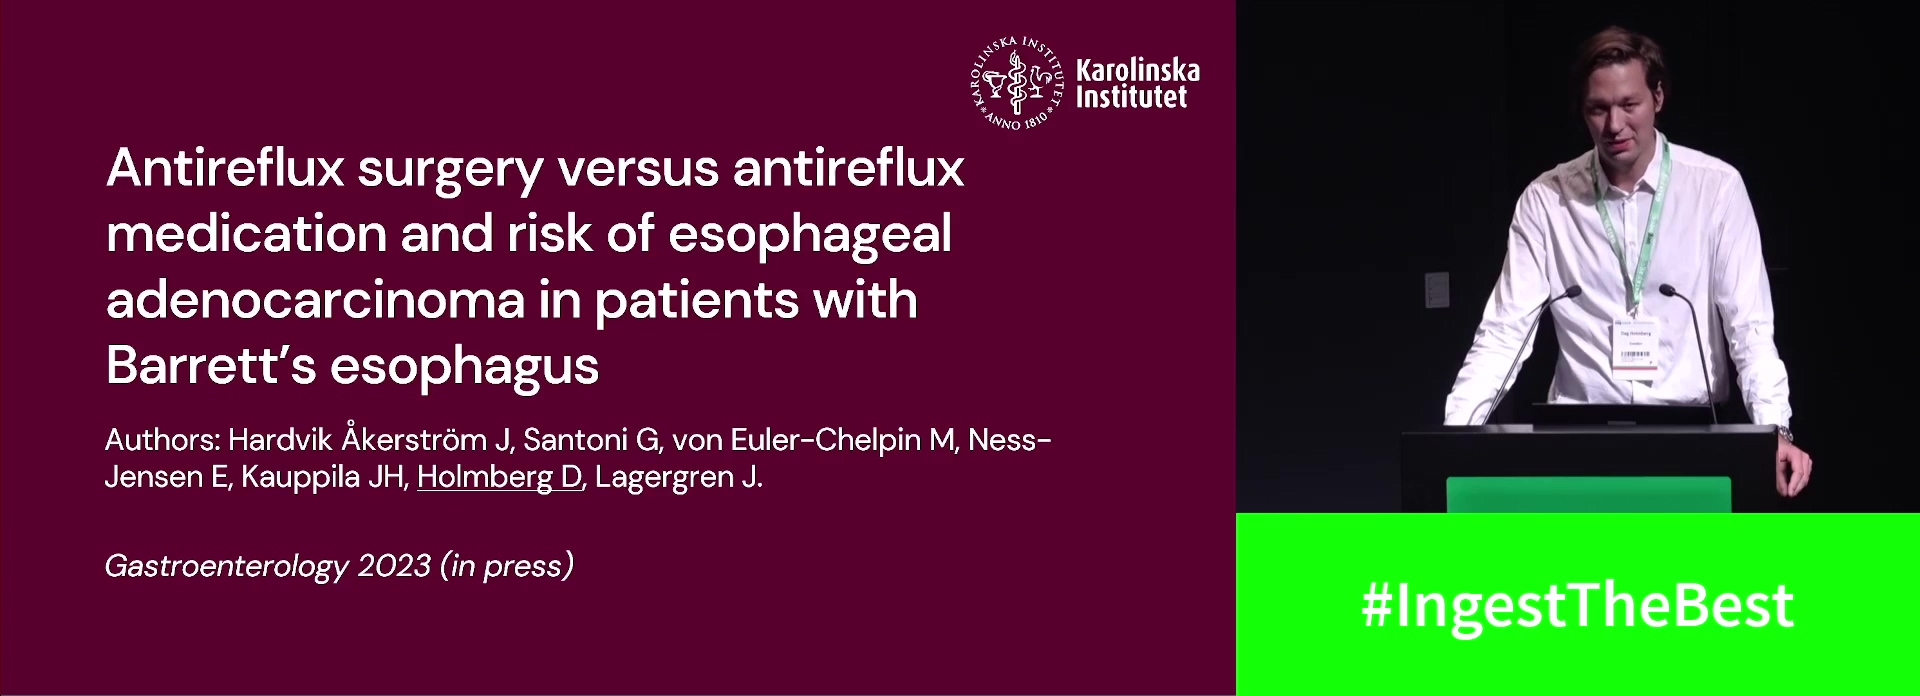 ANTIREFLUX SURGERY VERSUS ANTIREFLUX MEDICATION AND RISK OF ESOPHAGEAL ADENOCARCINOMA IN PATIENTS WITH BARRETT’S ESOPHAGUS